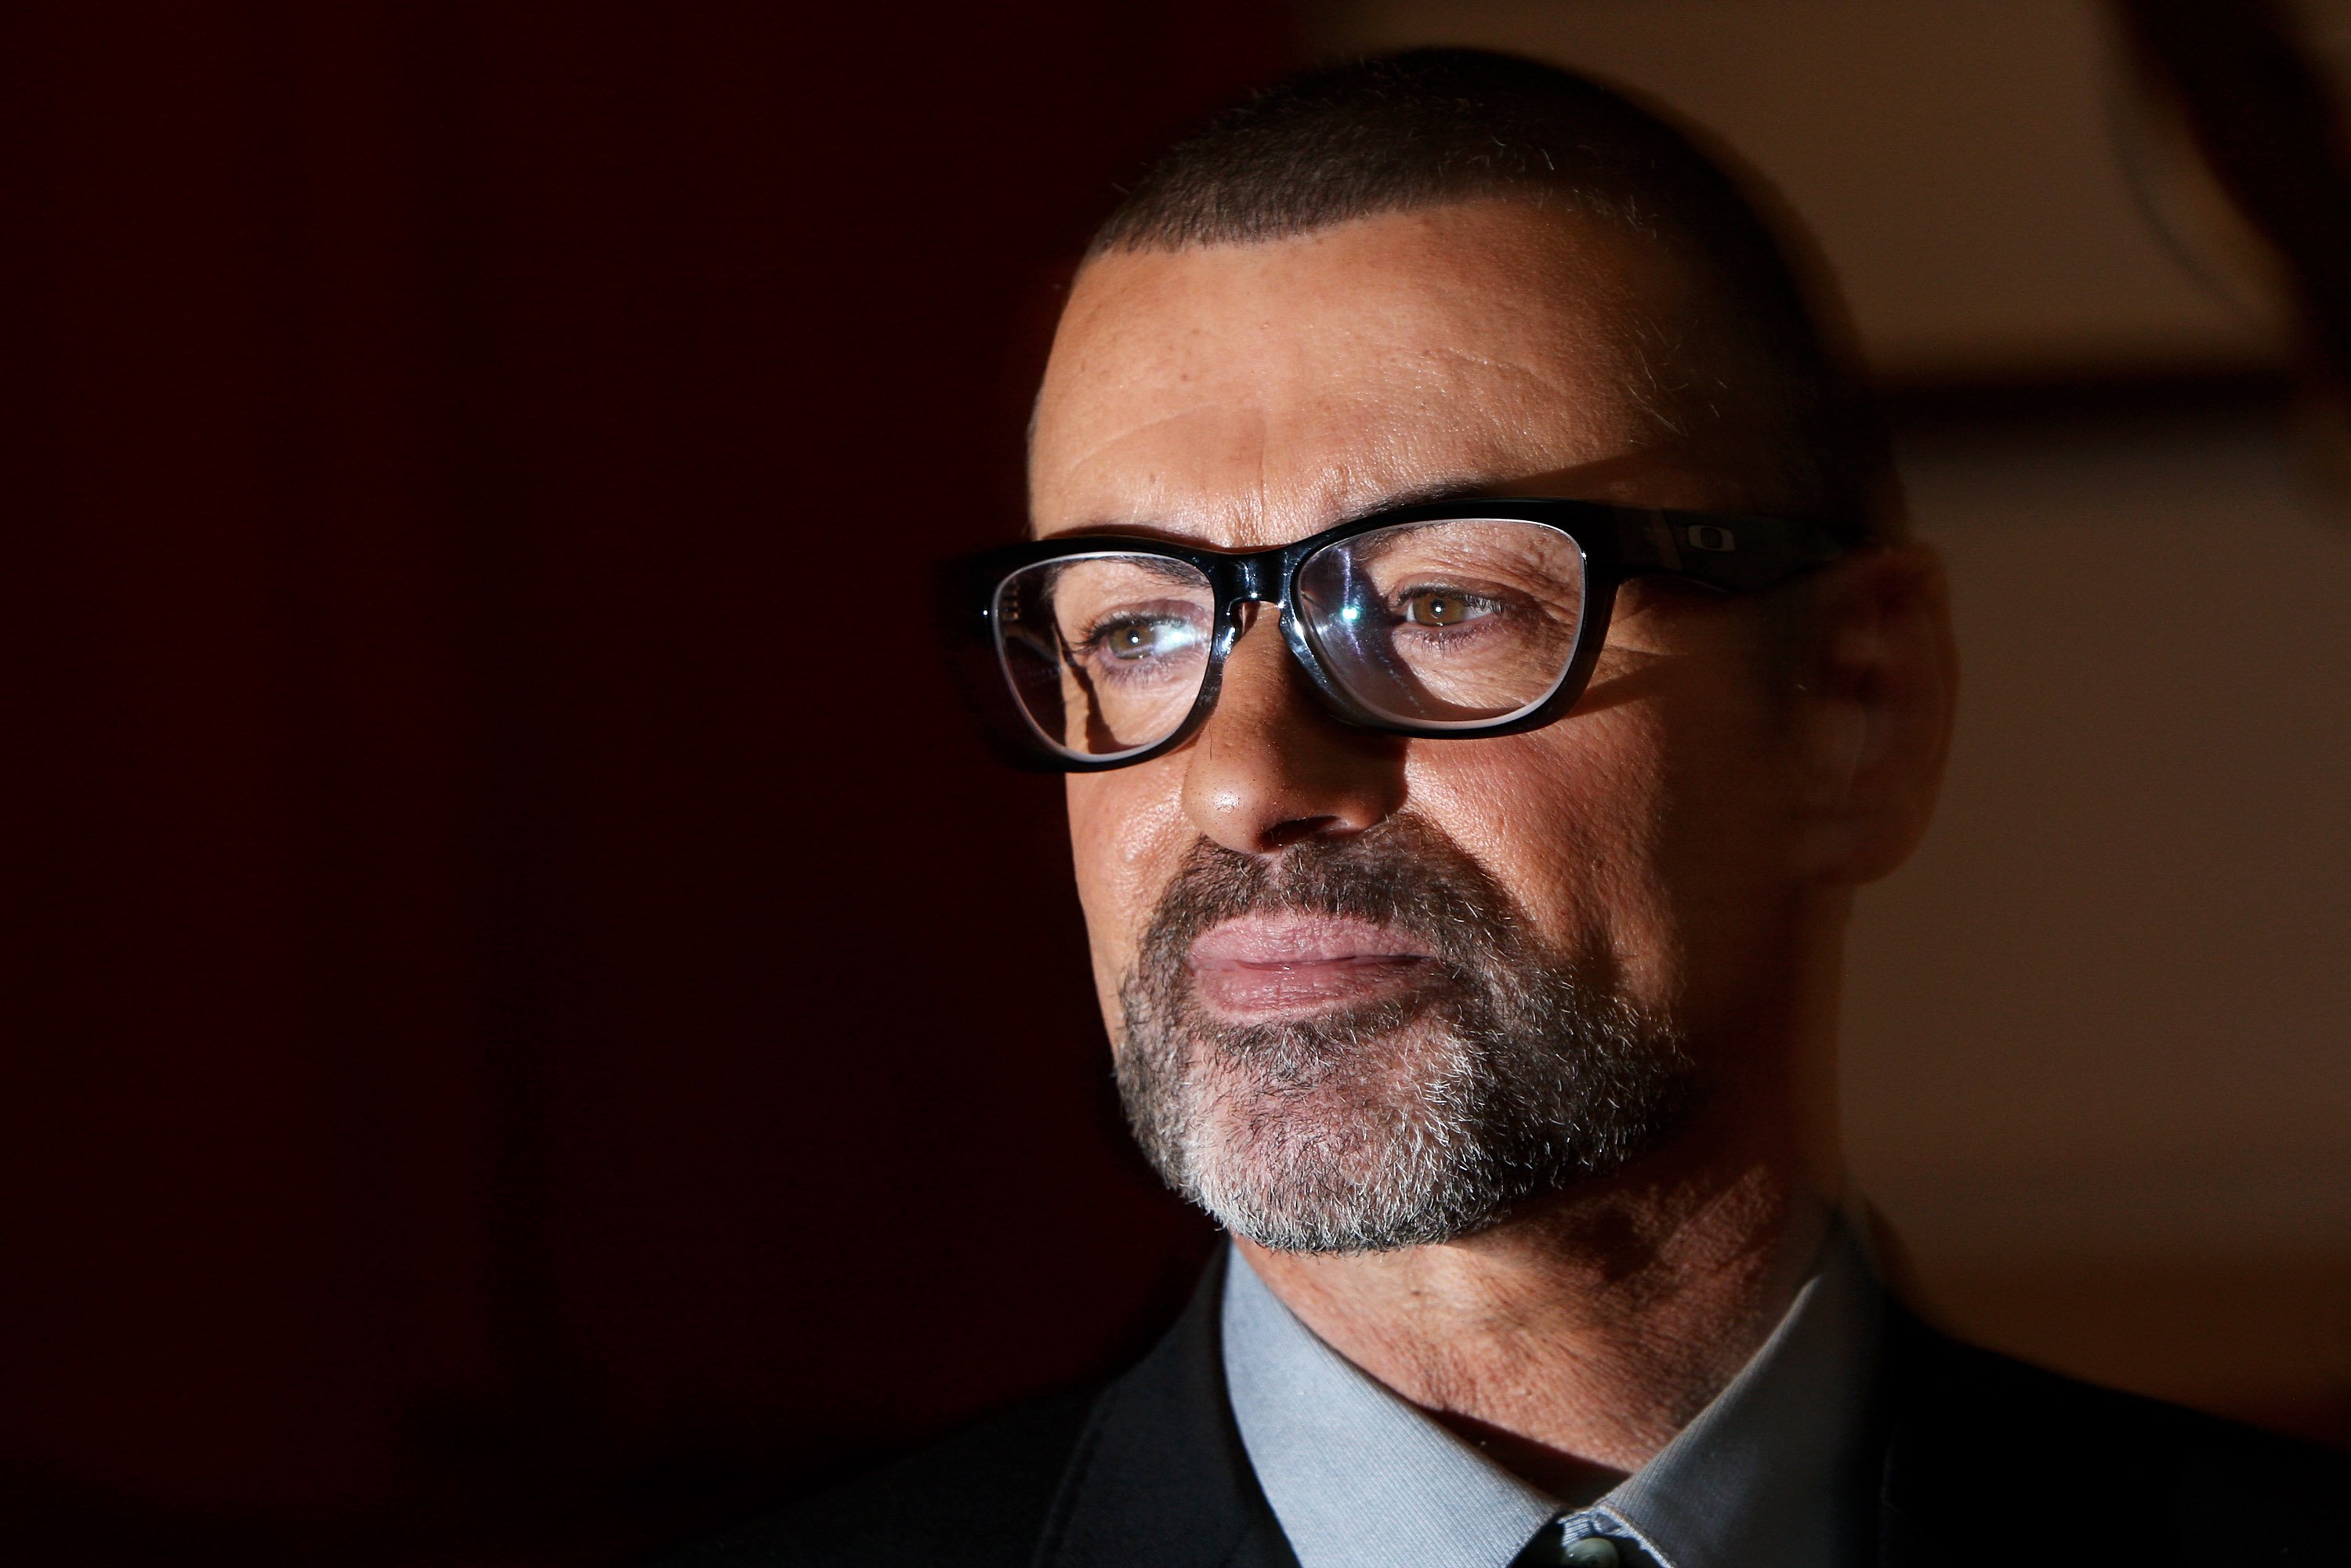 George Michael attending a press conference at The Royal Opera House